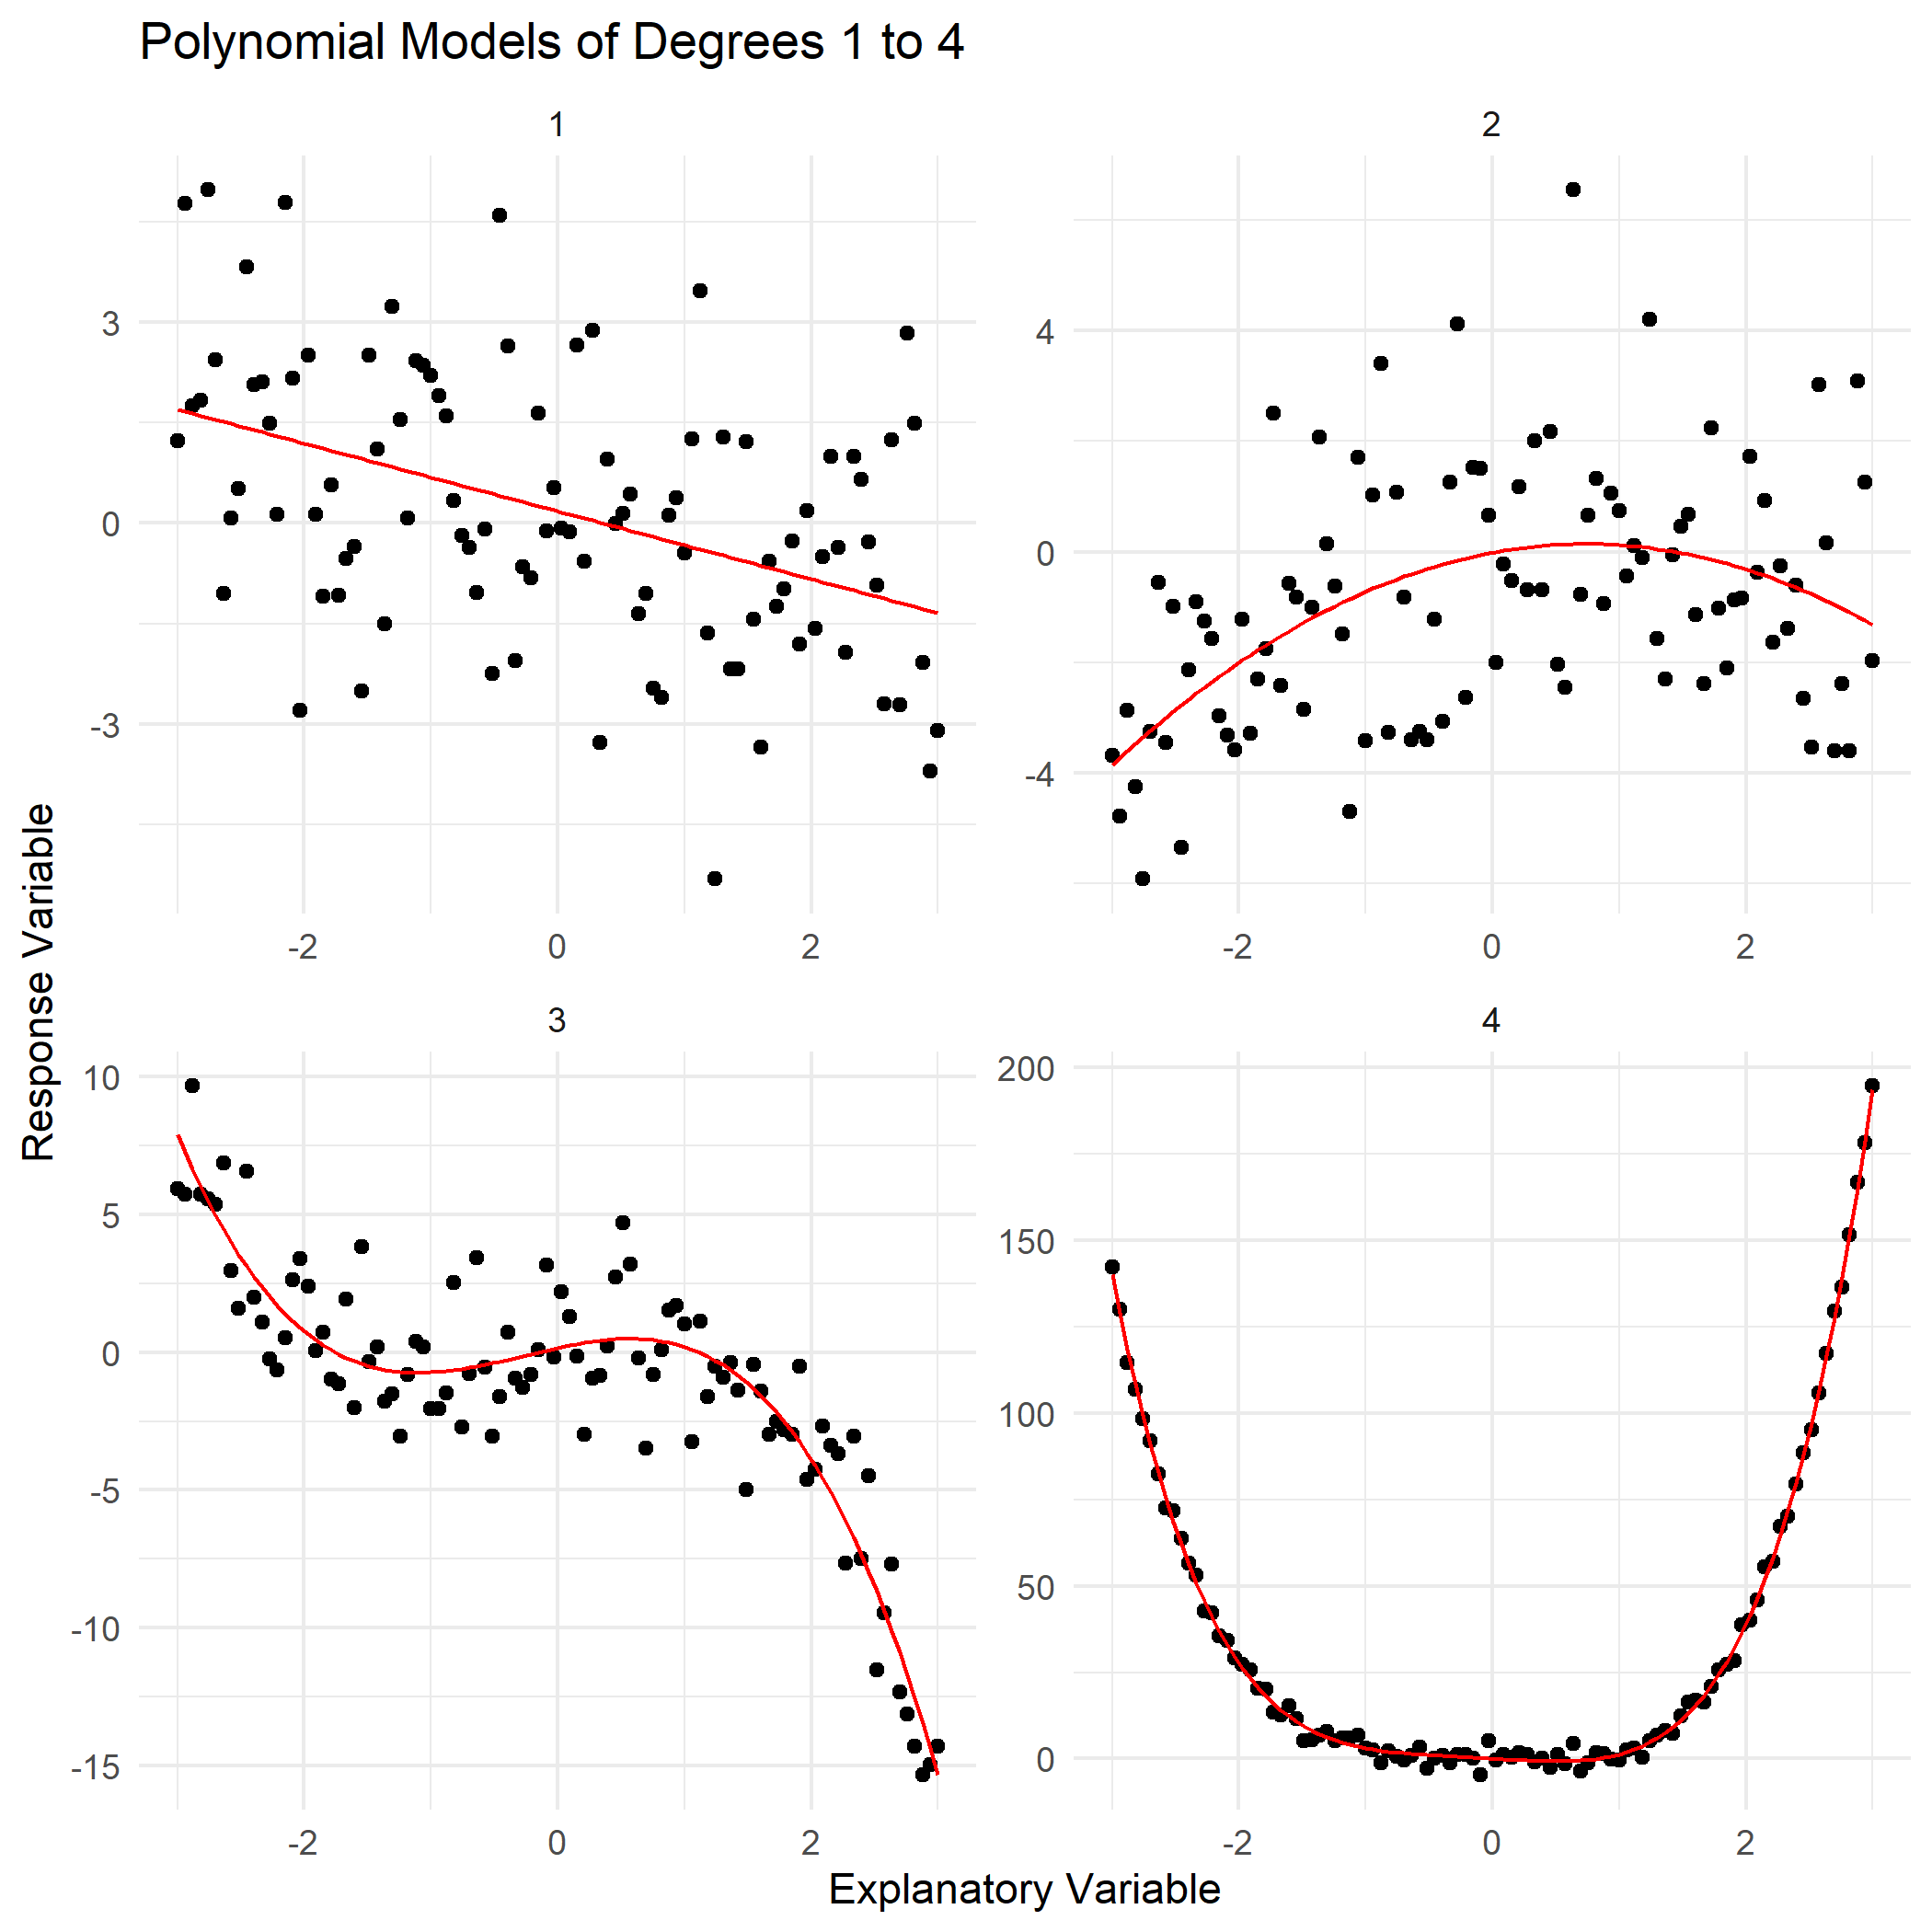 Comparative Visualization of Polynomial Fits: Degrees 1 to 4